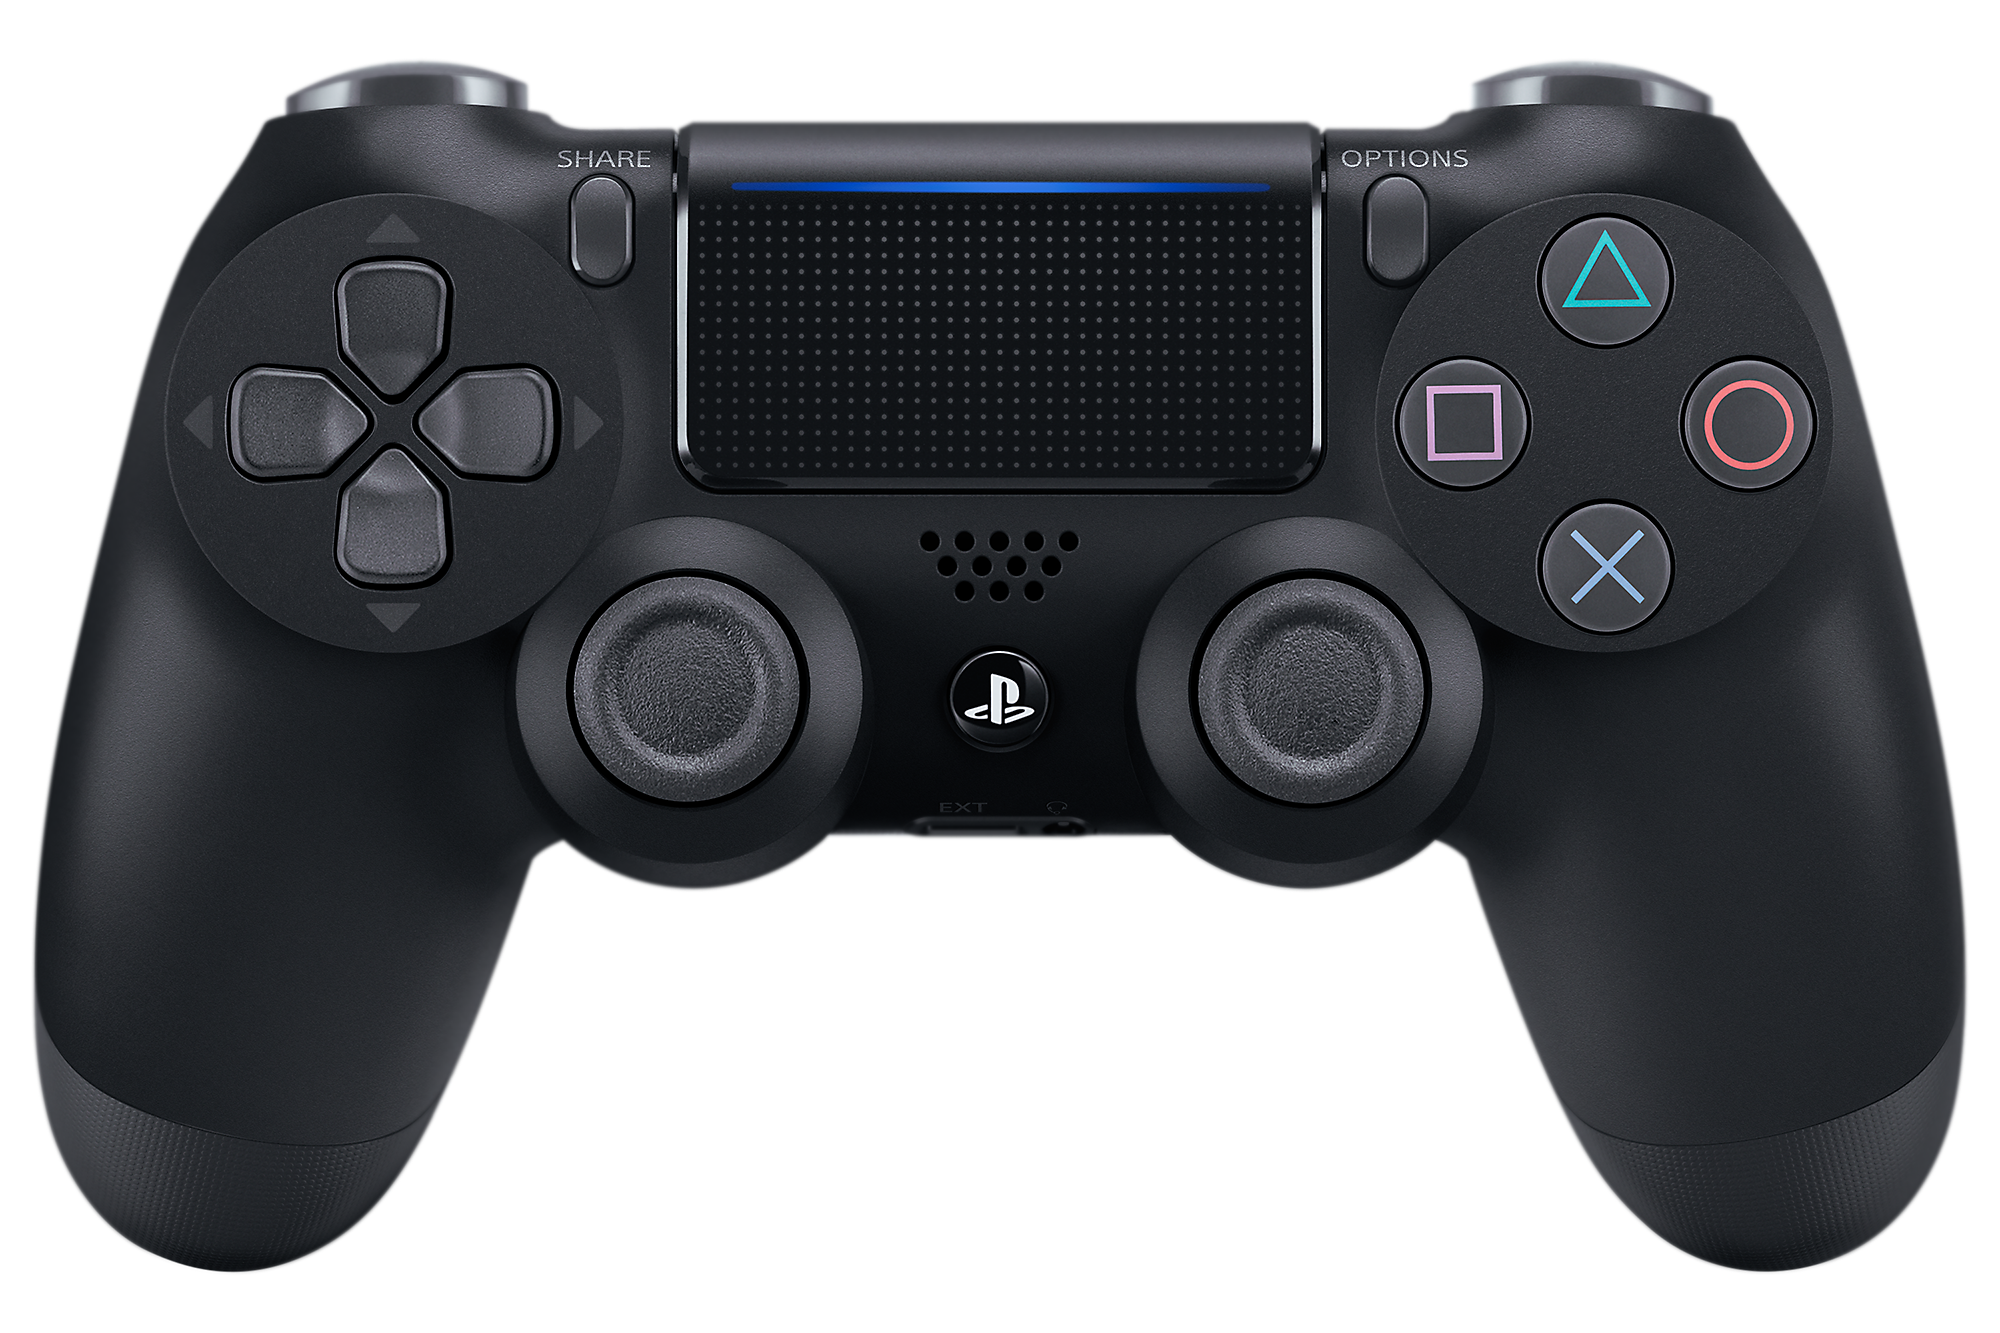 how to use ps3 controller on ps4 2019